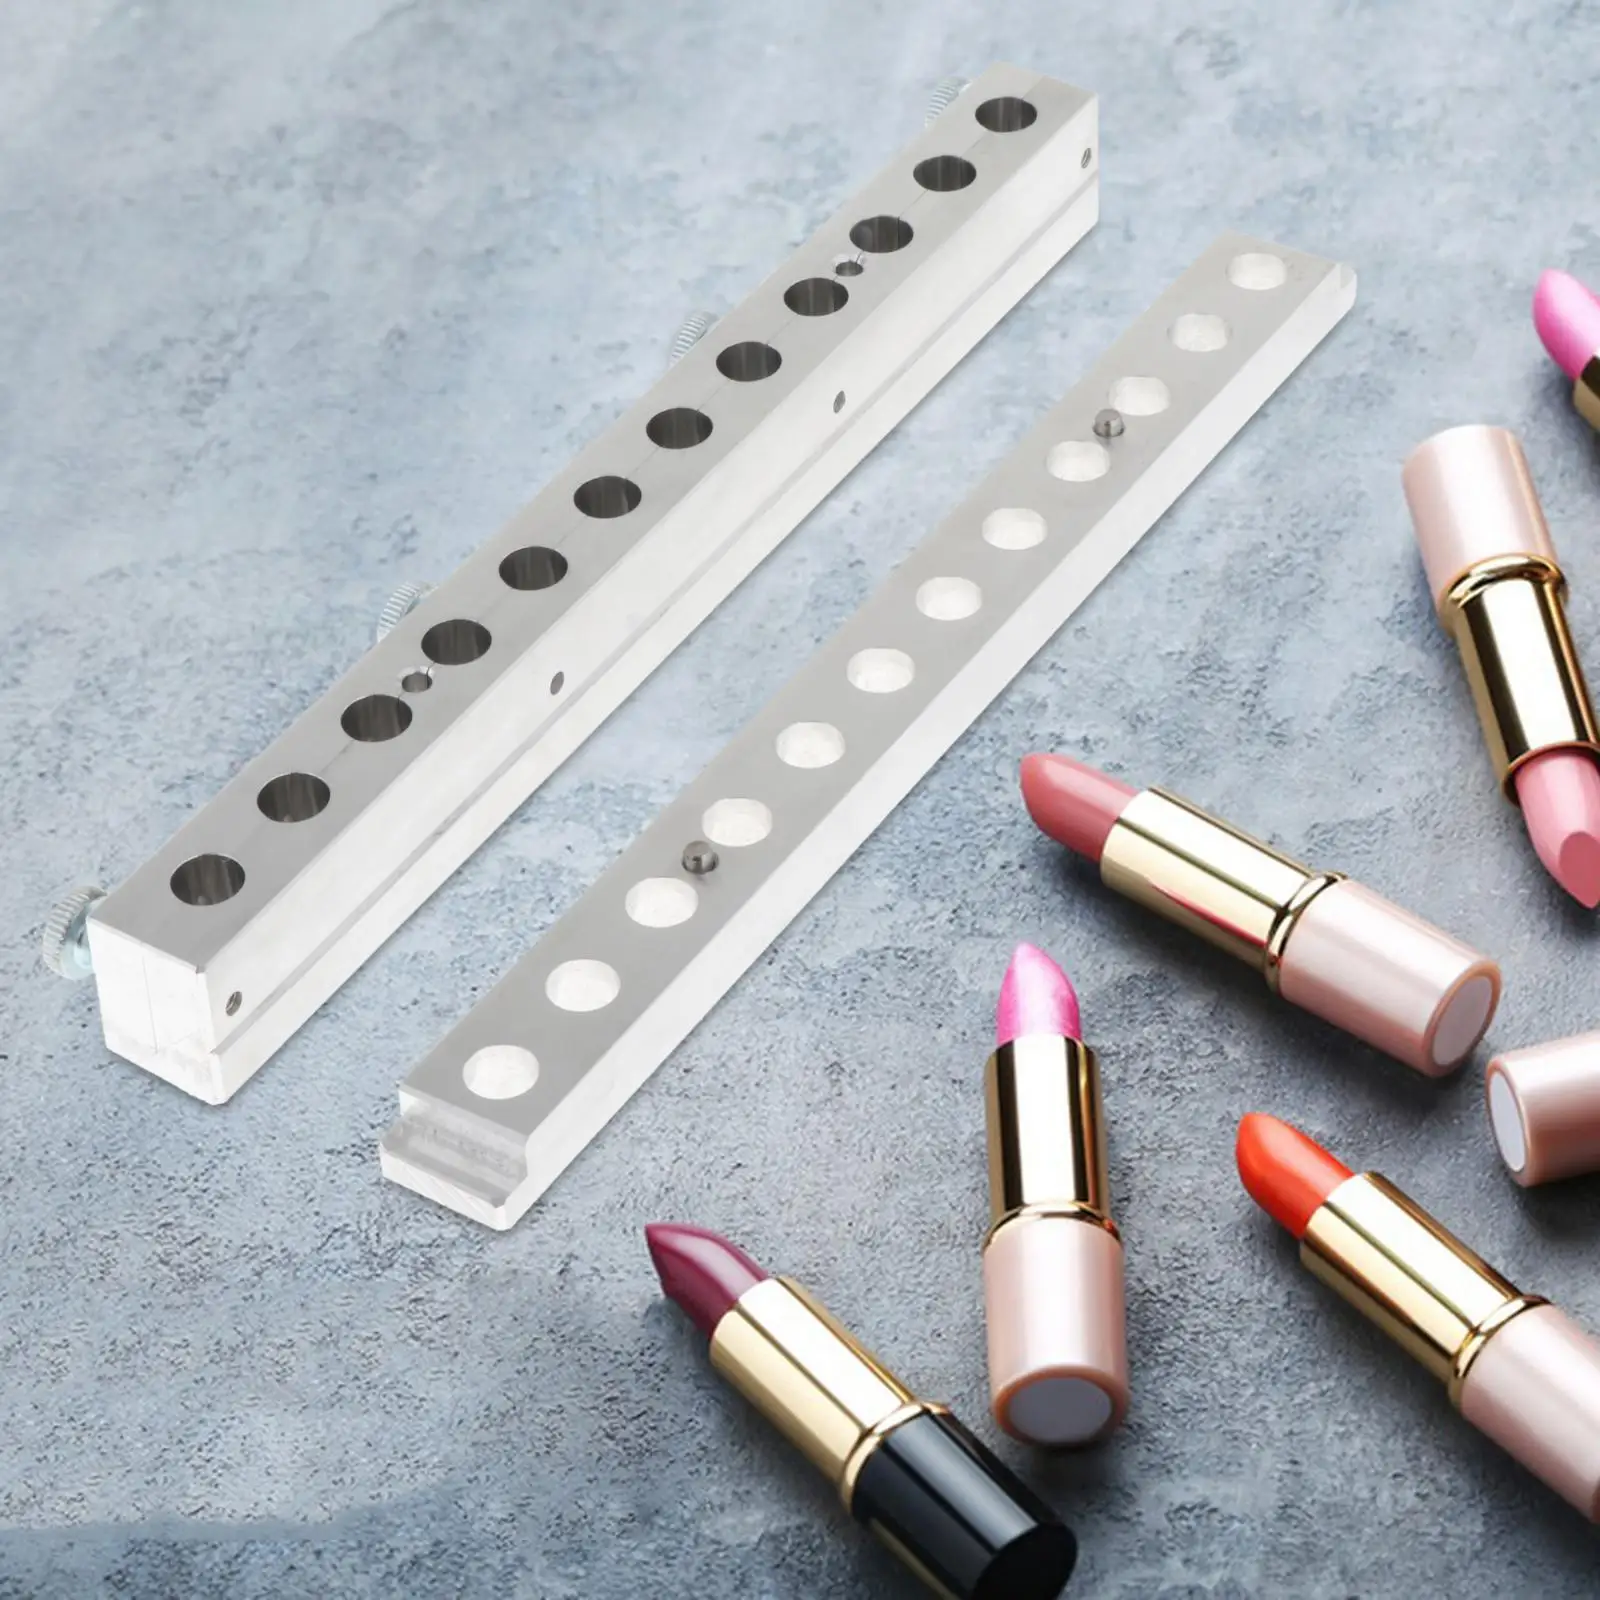 DIY Lipstick Model 12 Holes Beauty Crafting Lipglosses Cosmetic Accessories